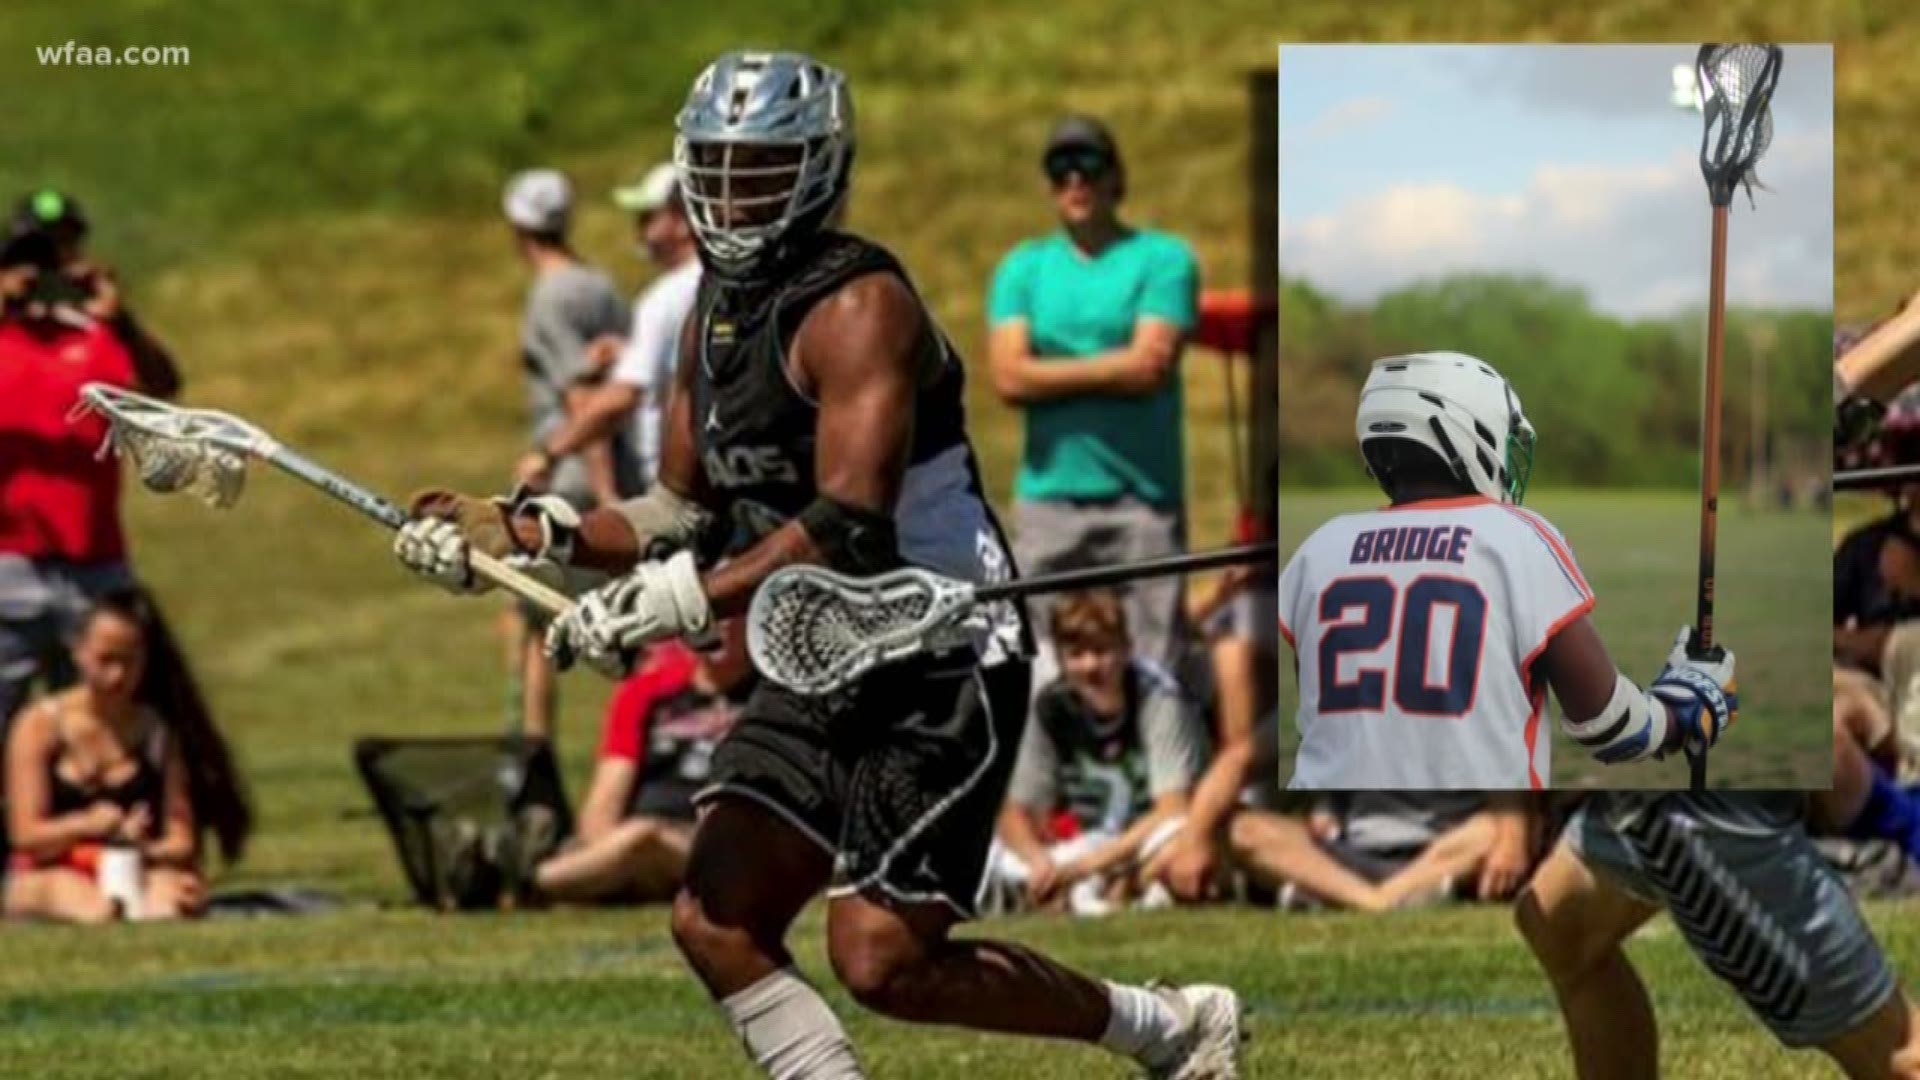 "You don't really hear about people from where I'm from playing lacrosse."